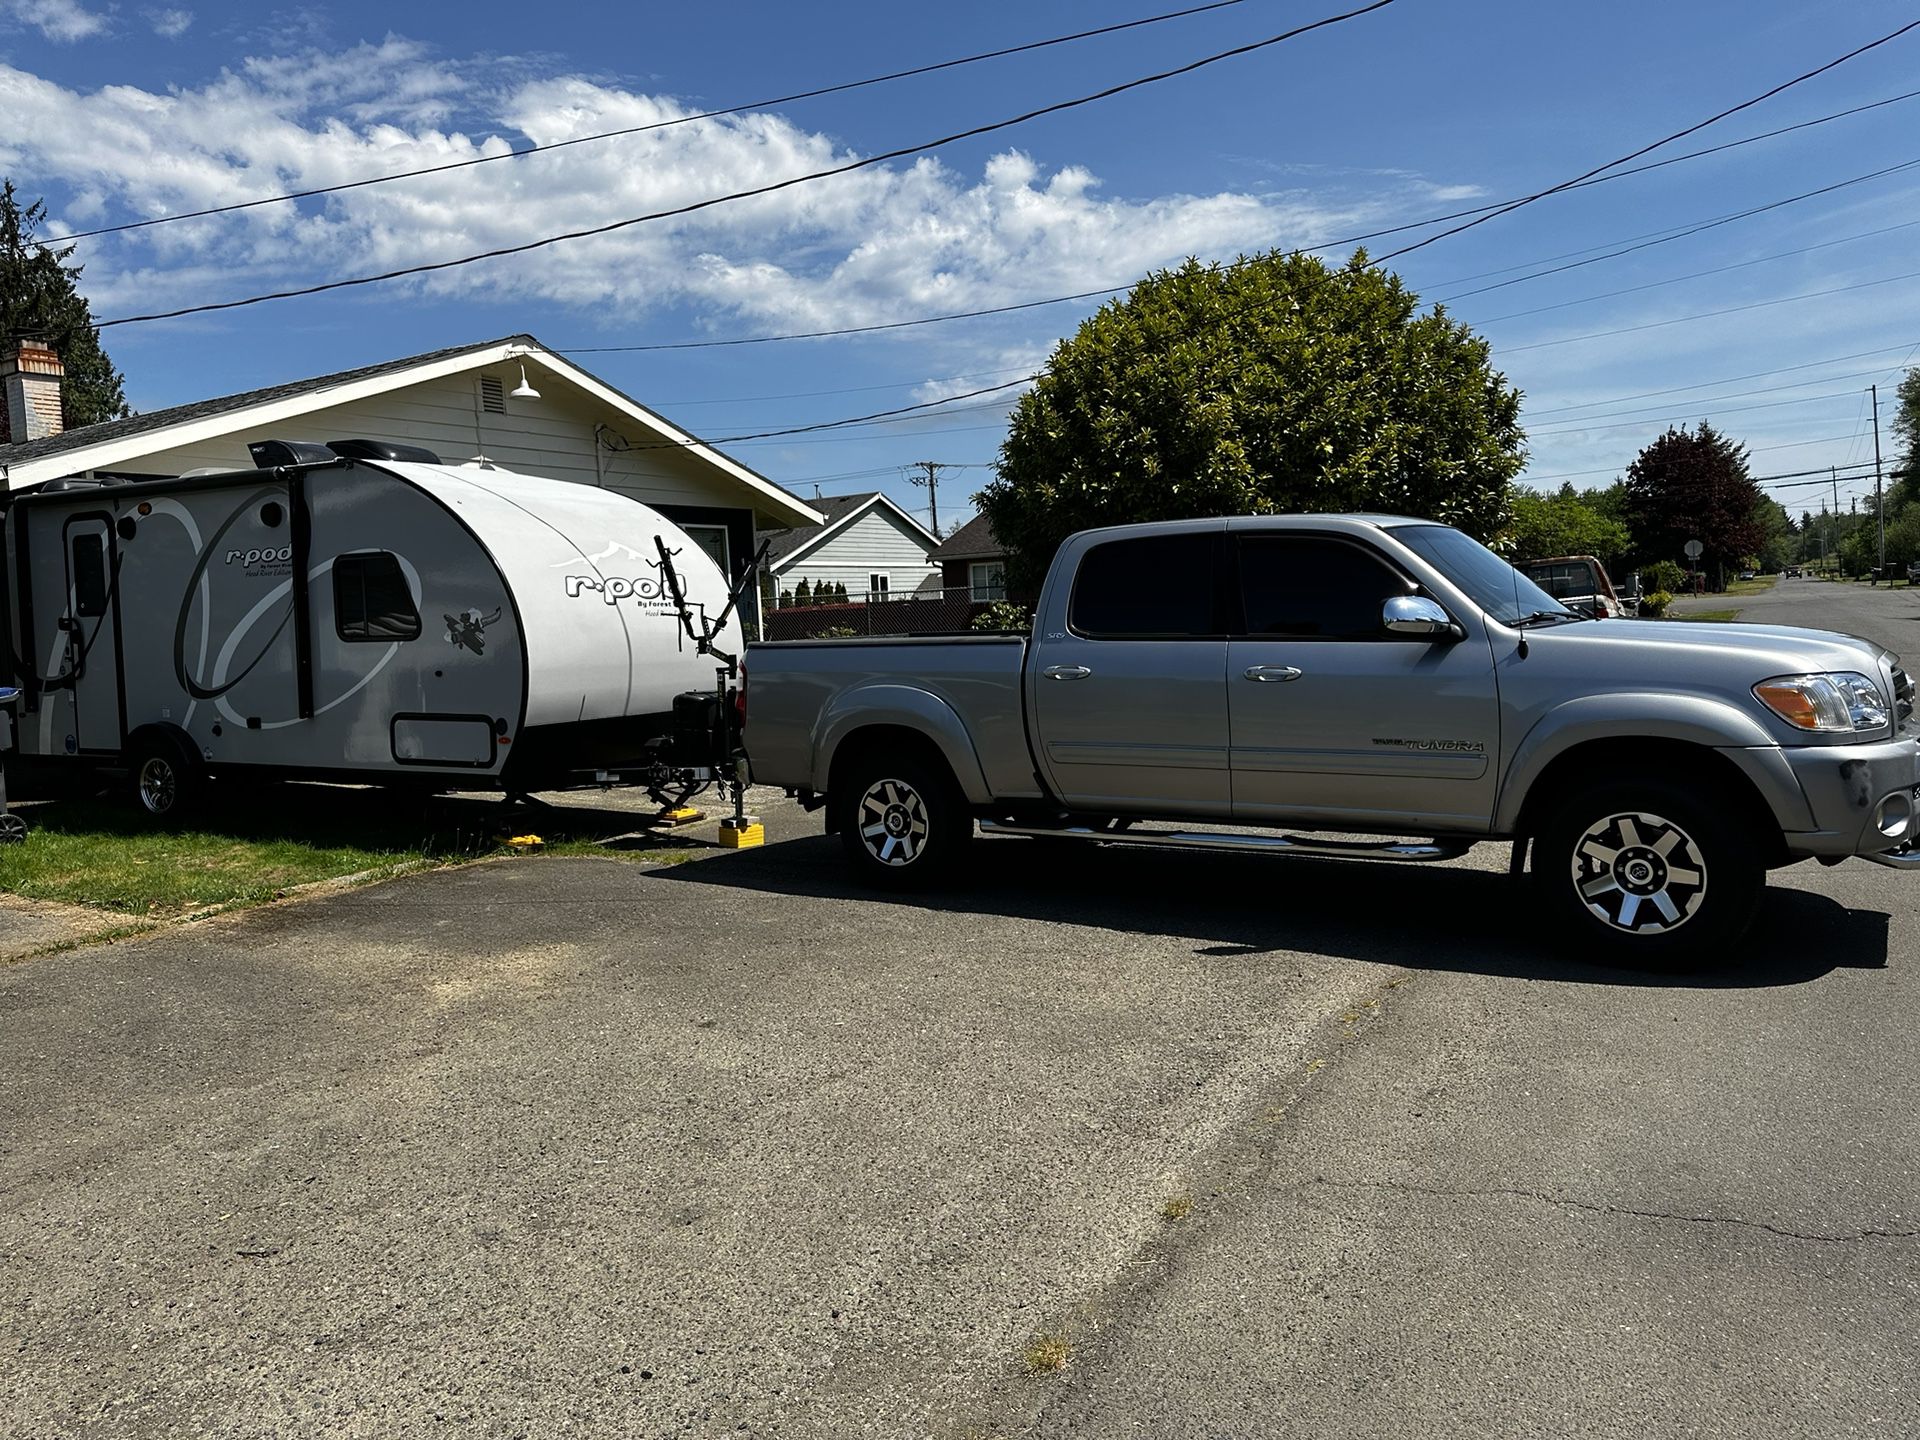  RV R-pod 2020 Toyota and Forest River R-pod 195 2006 Toyota Tundra and 2020 Hood River Edition By Forest River R-pod 195